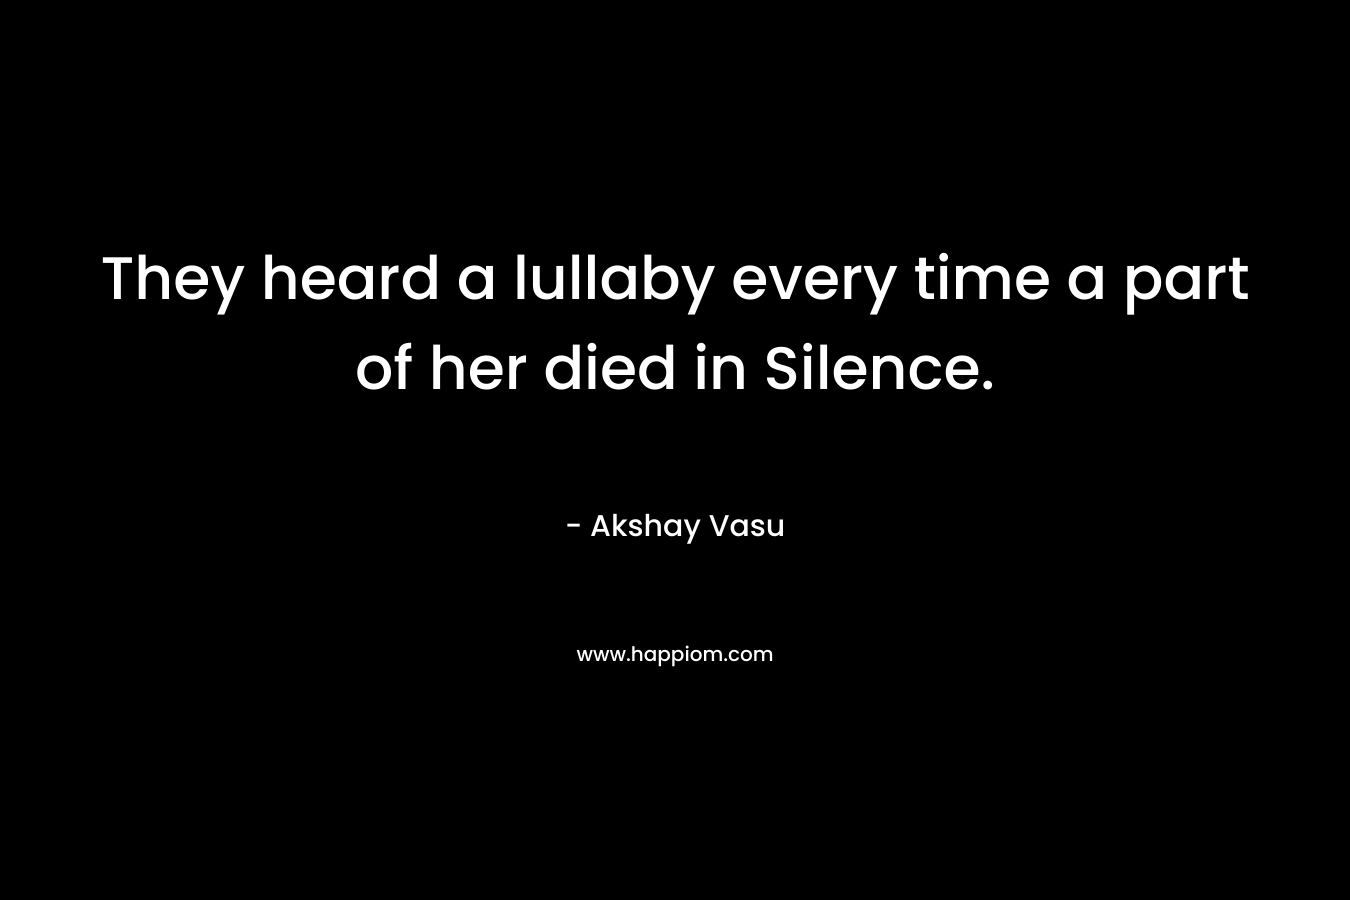 They heard a lullaby every time a part of her died in Silence.